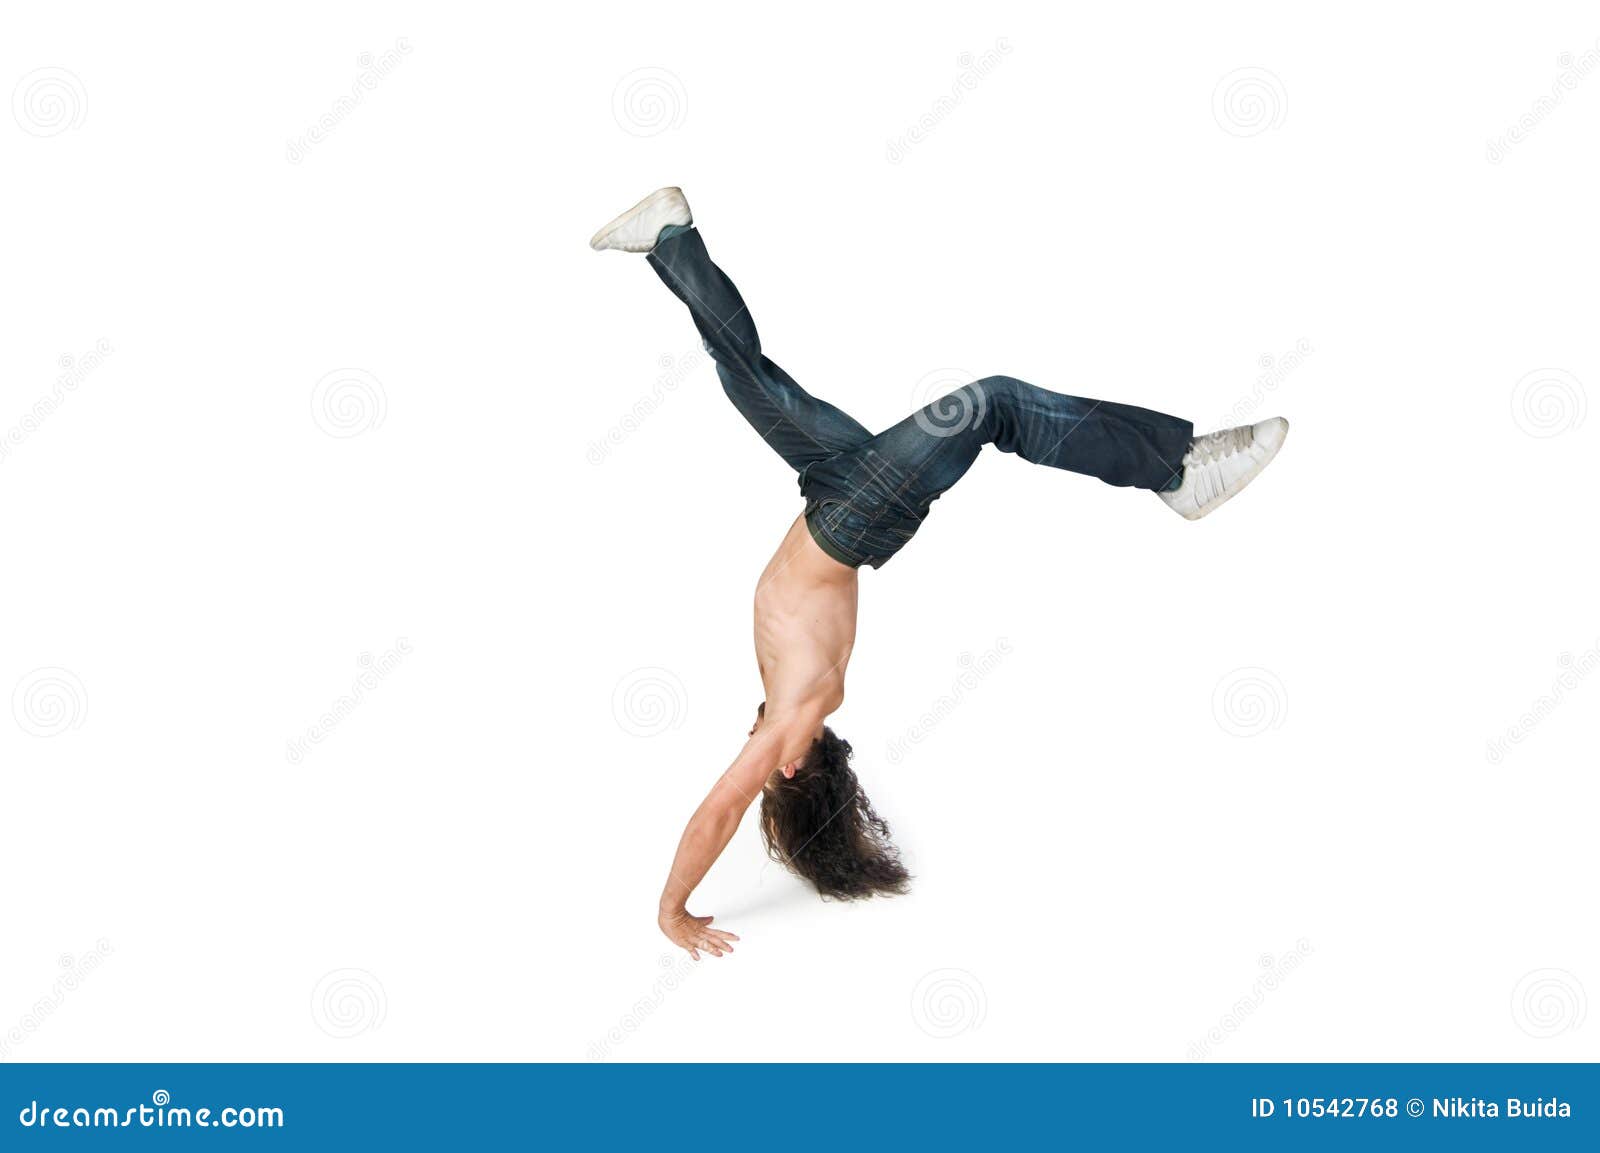 Cool handstand stock photo. Image of muscular, breakdance - 10542768